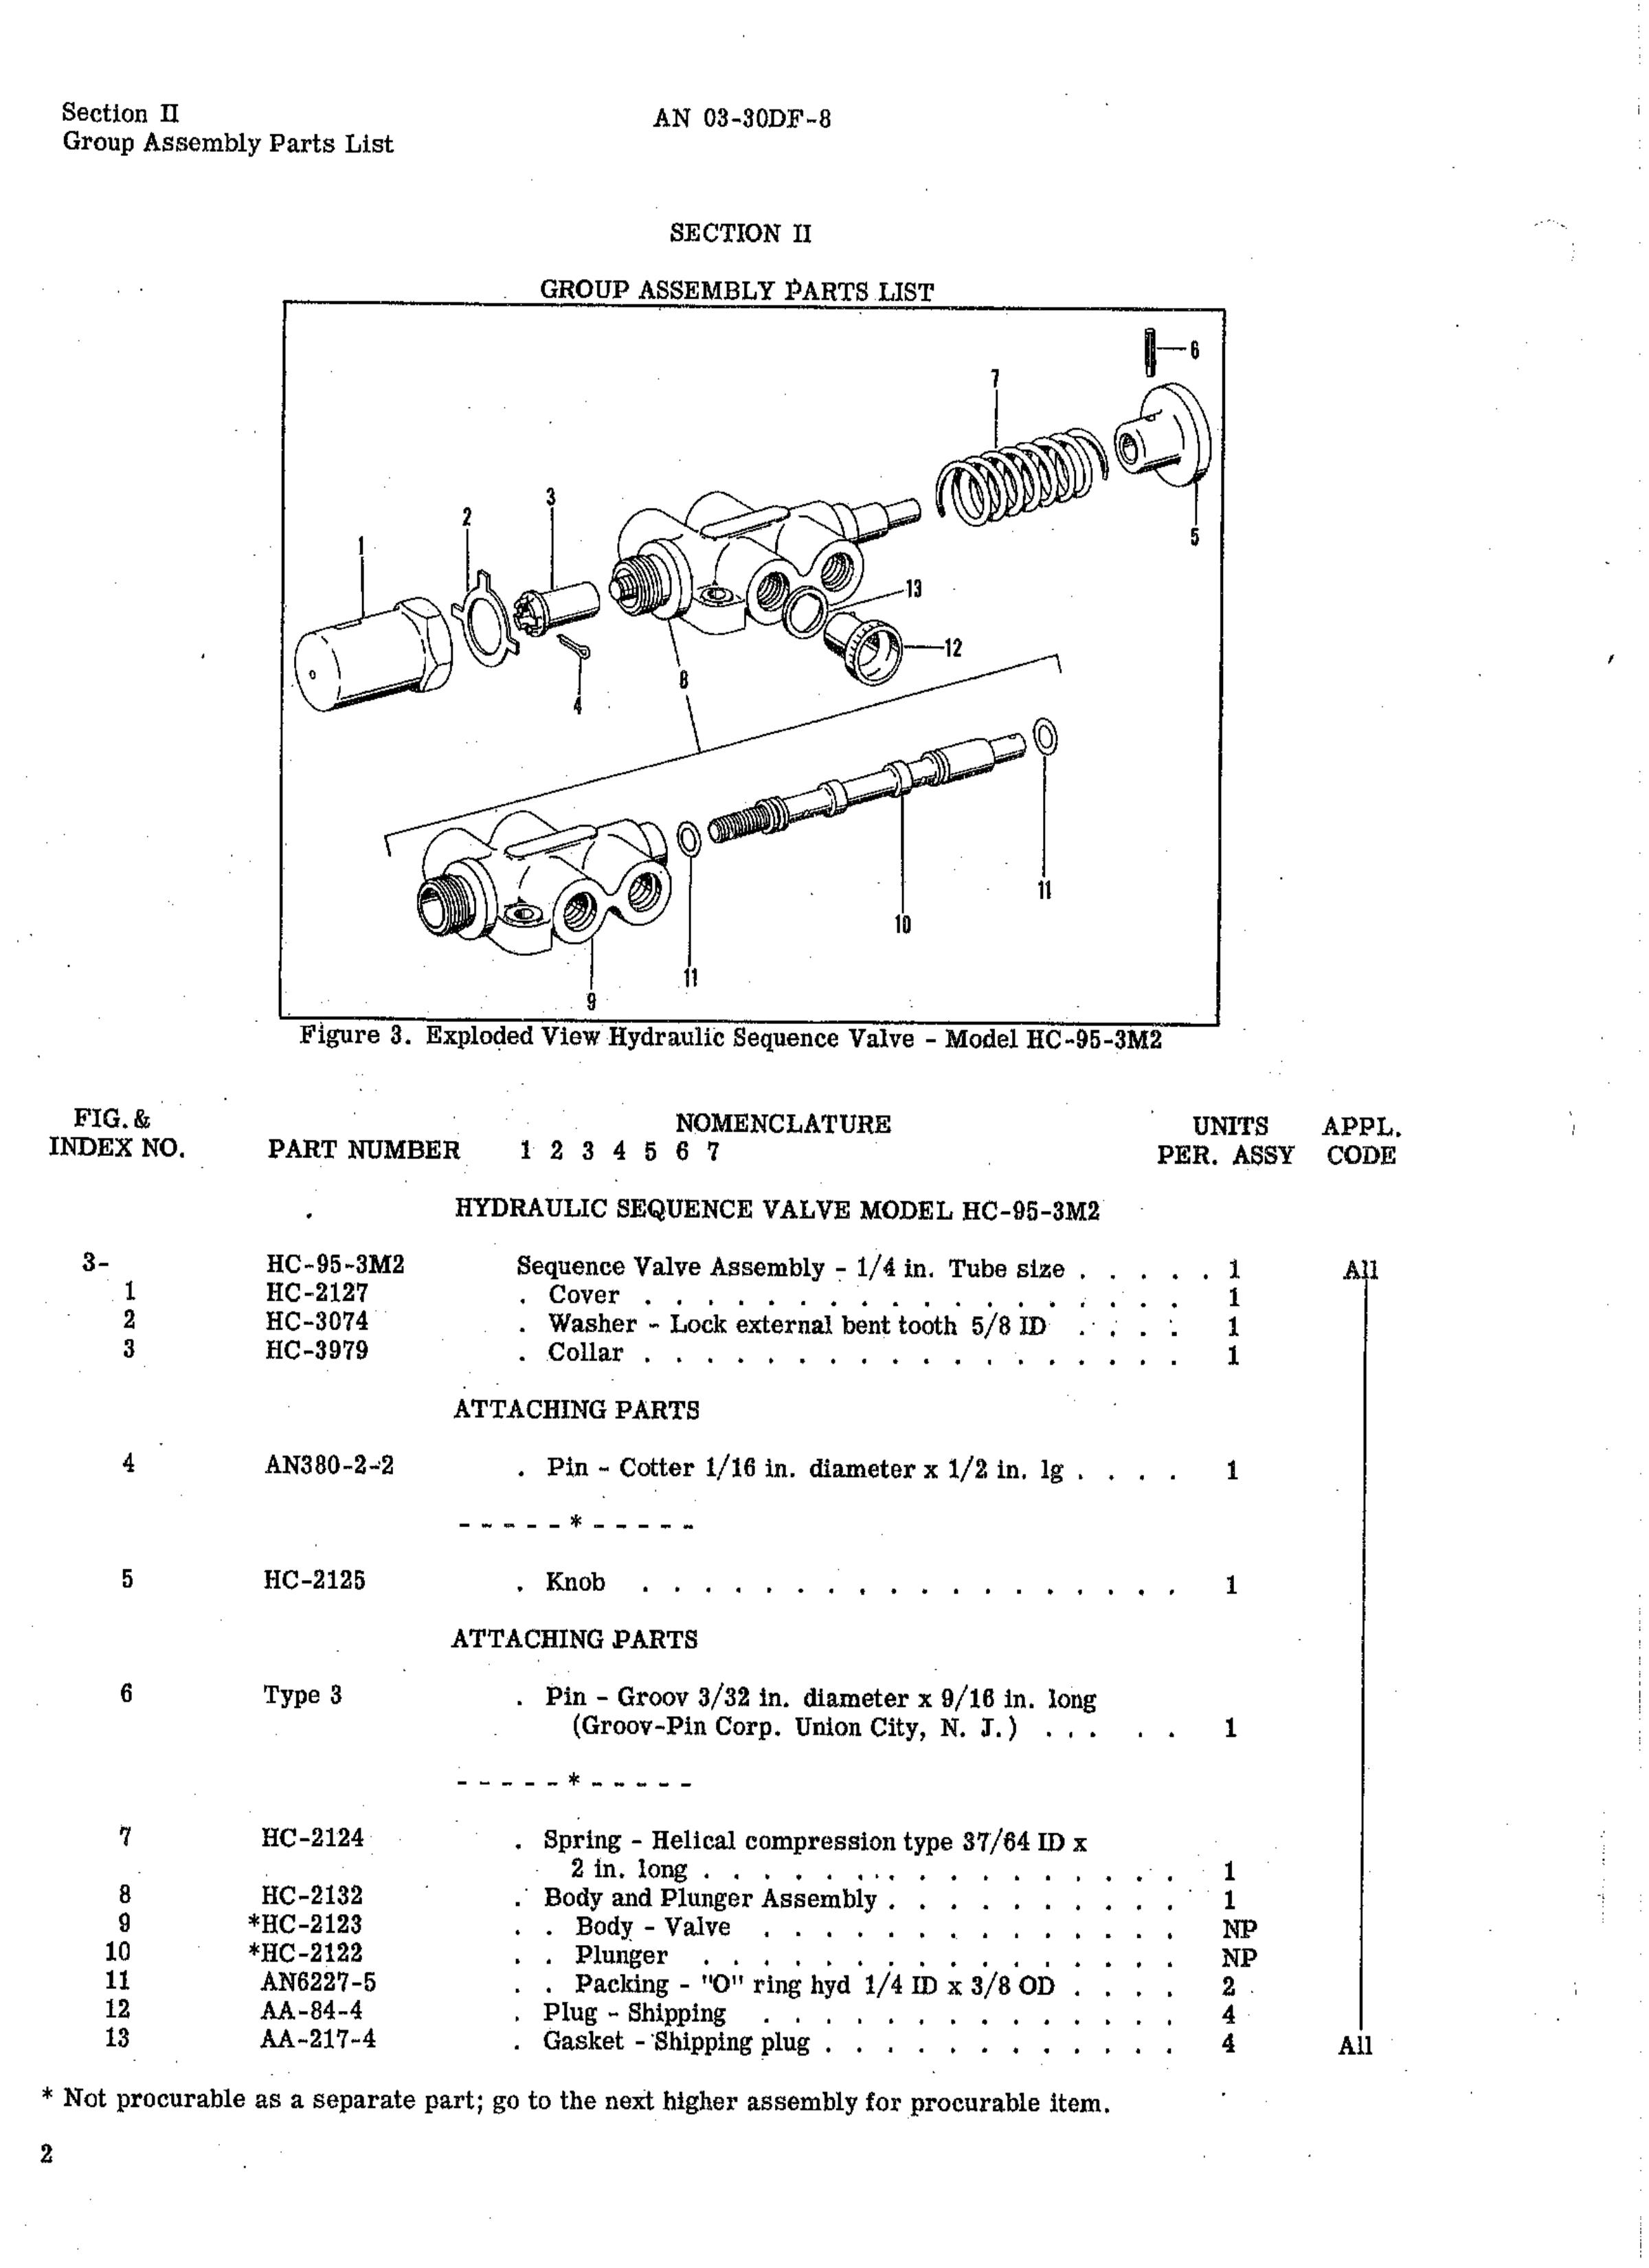 Sample page 4 from AirCorps Library document: Parts Catalog for Hydraulic Sequence Valves